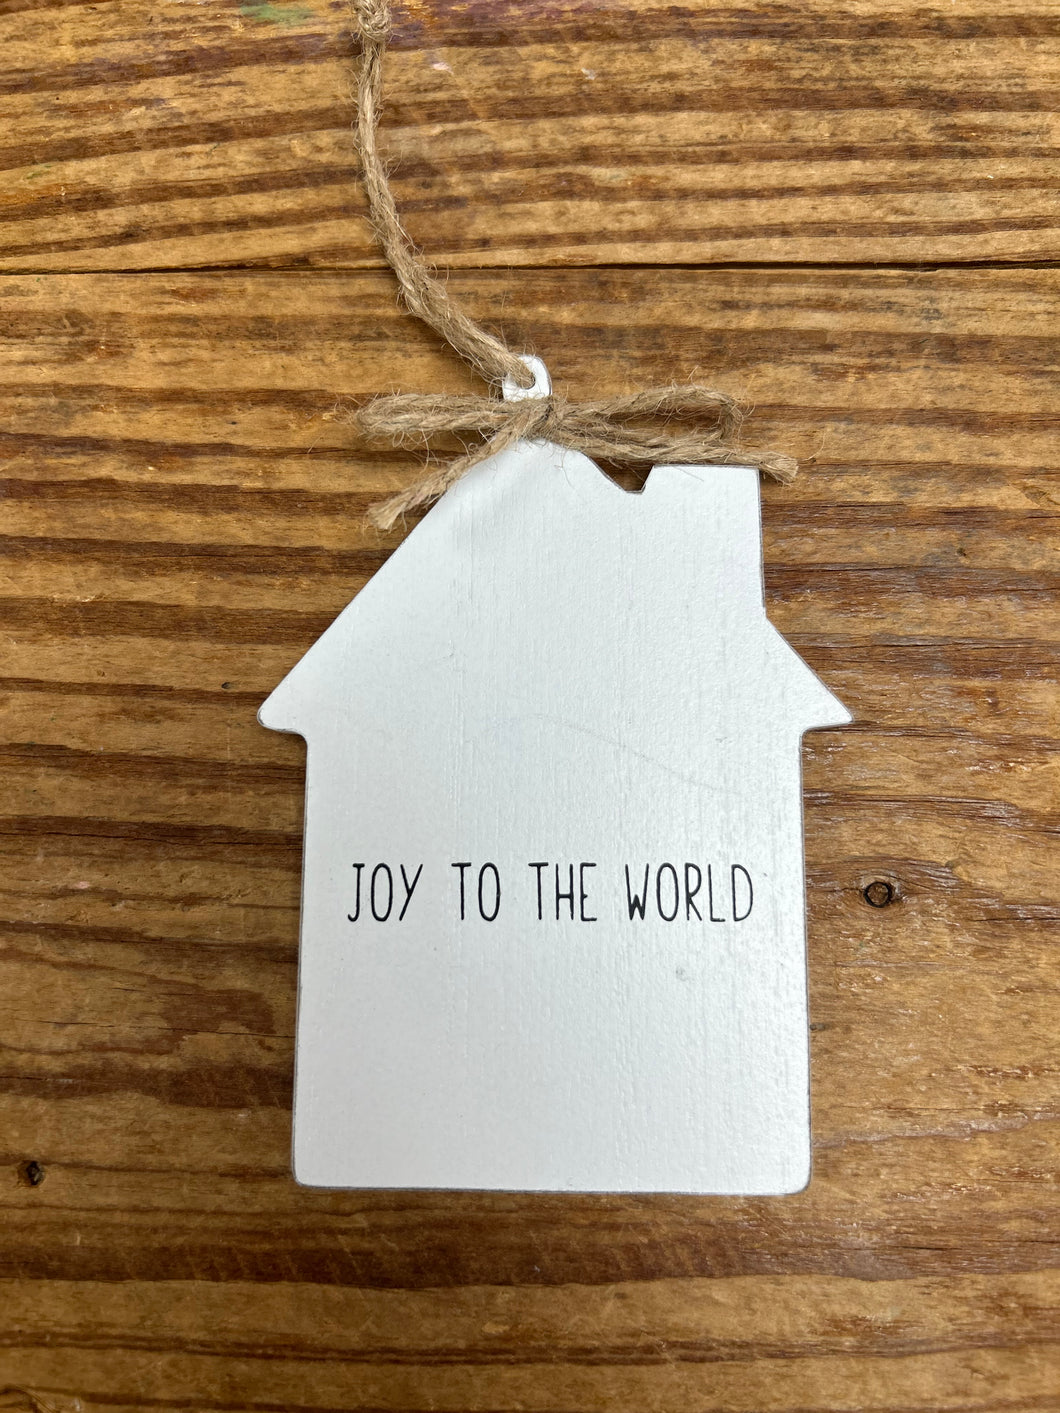 joy to the world house ornament